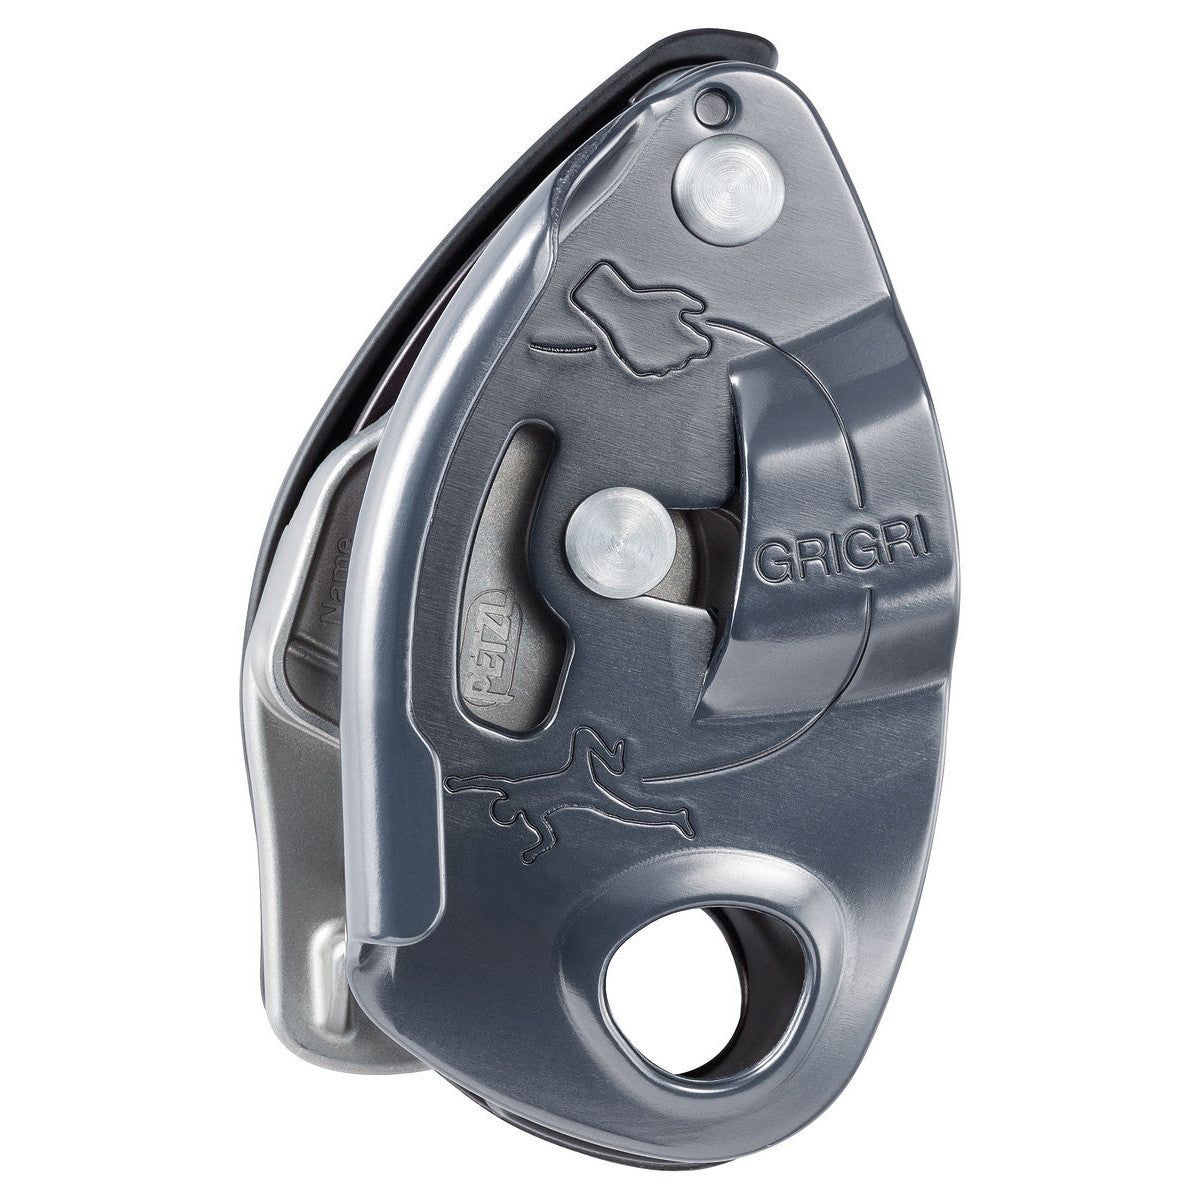 Petzl Grigri belay device, showing side view in orange colour